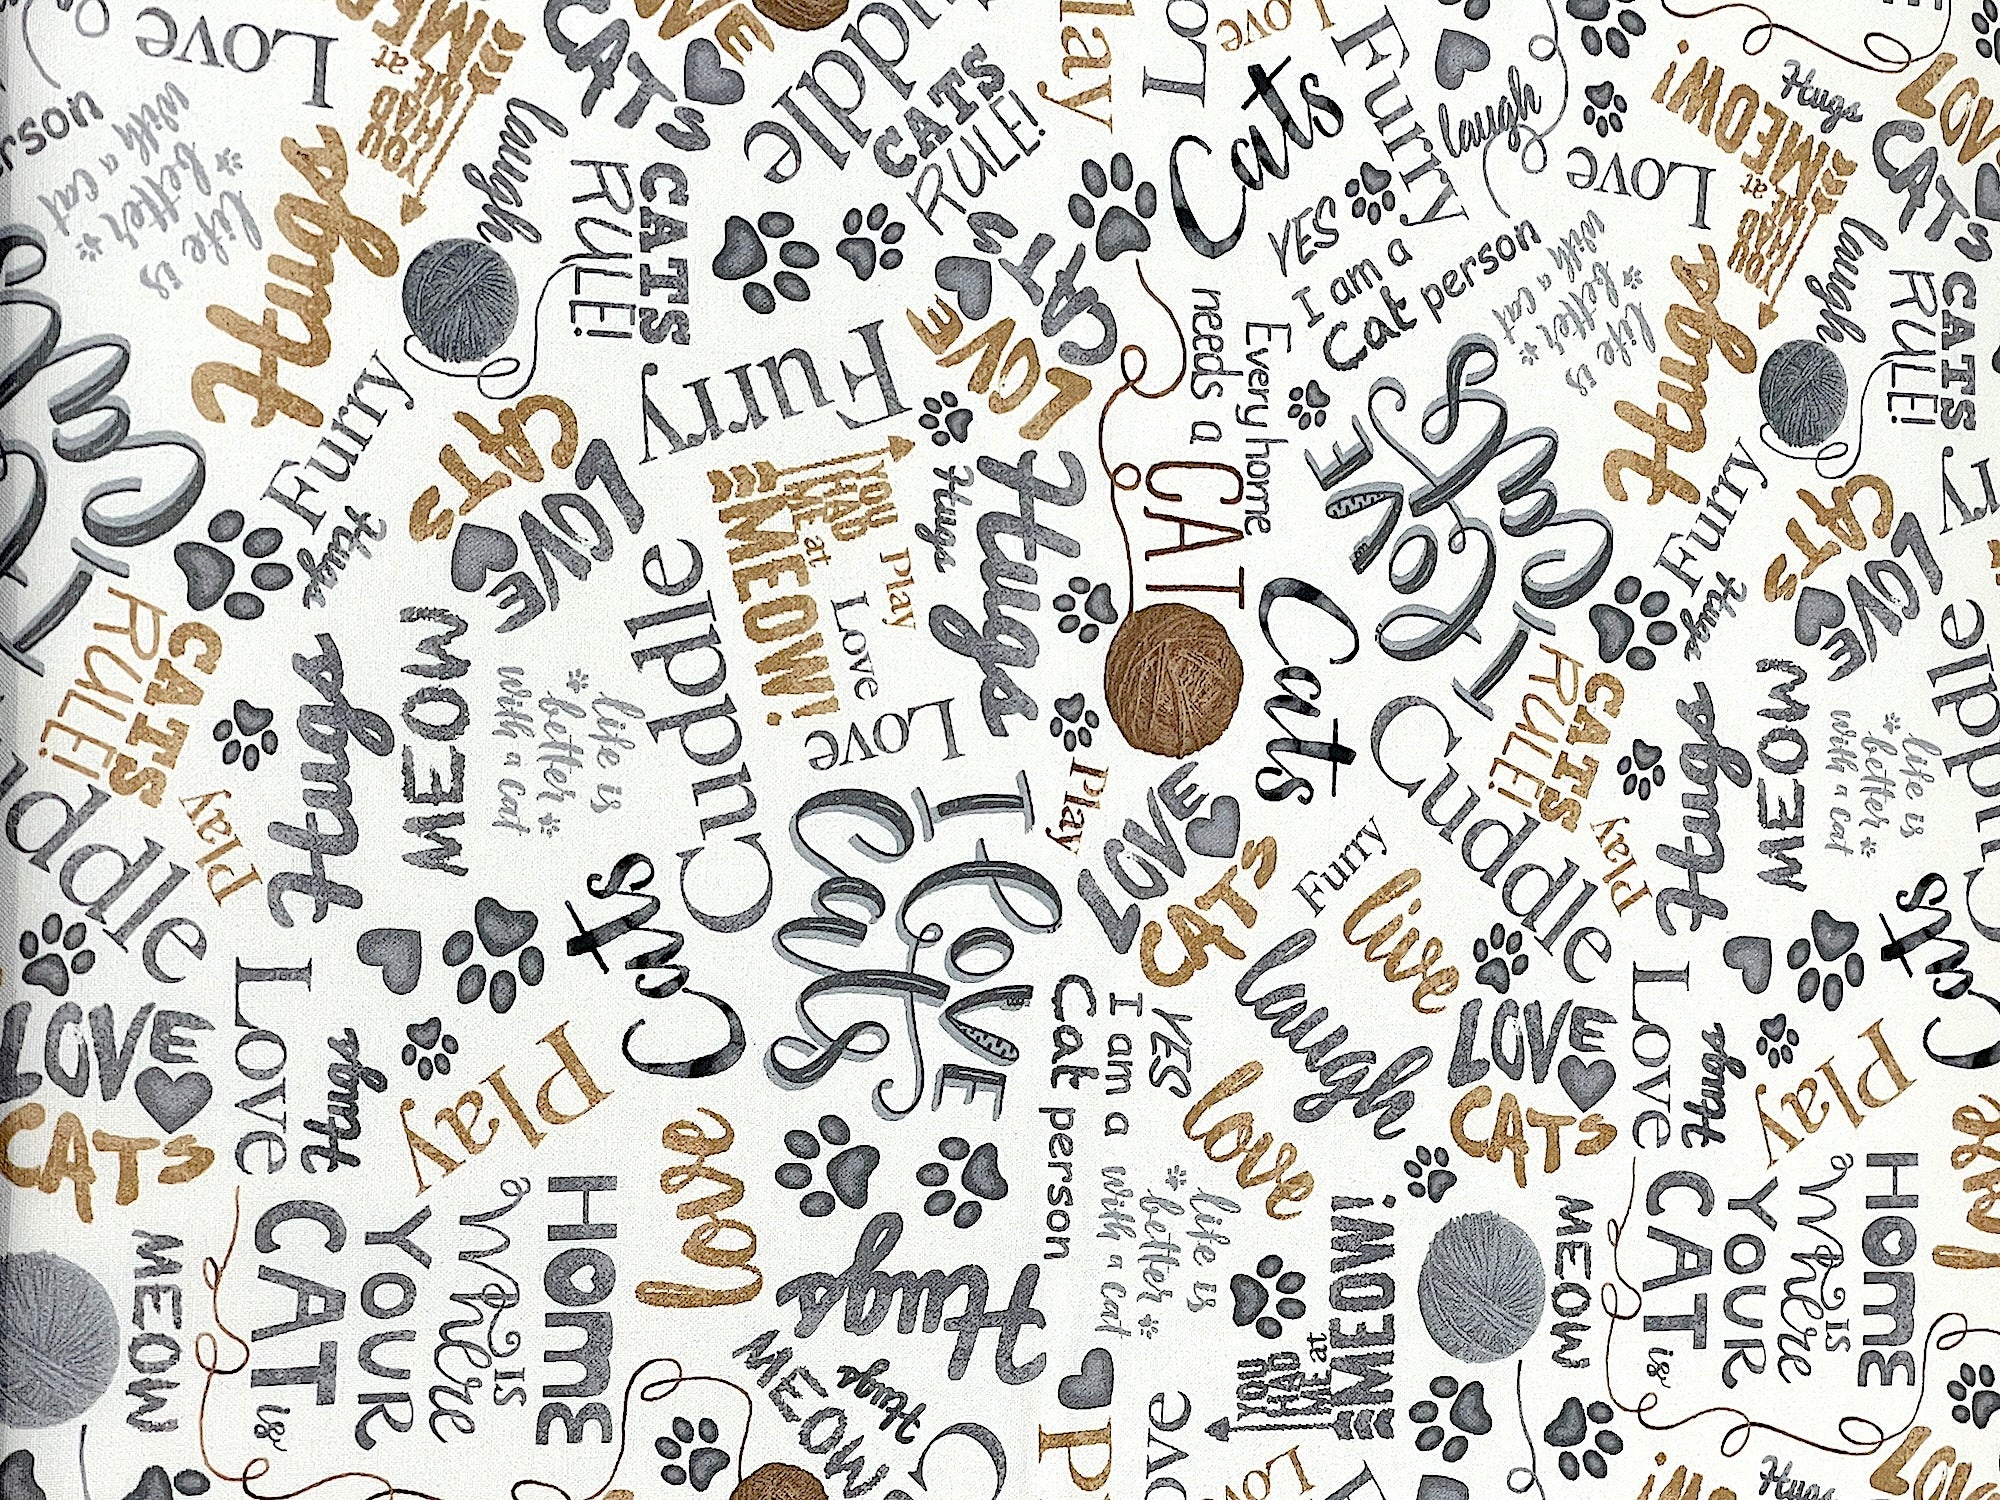 This cream colored cotton fabric is covered with balls of yarn and cat sayings.&nbsp; Some of the cat sayings are cuddle, meow, cats rule, home is where your cat is, meow, laugh and more.